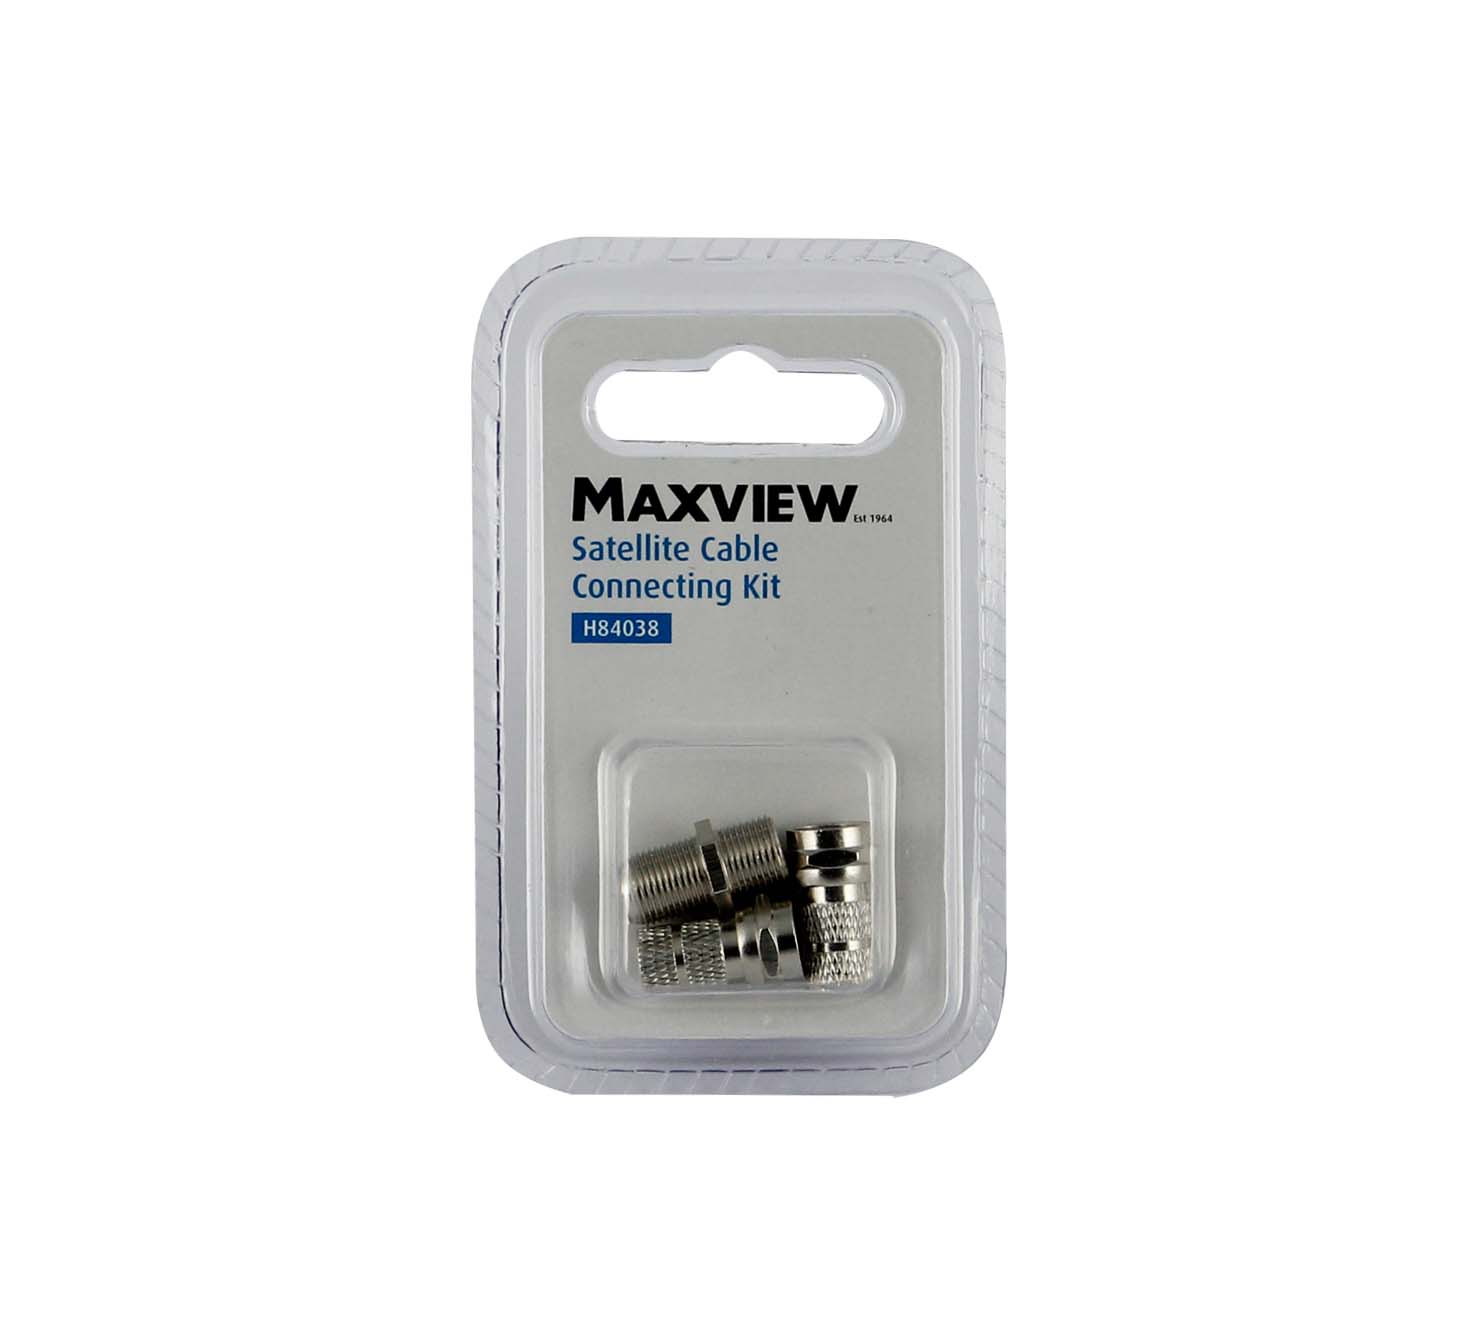 MAXVIEW H84038 2 F SATELLITE CABLE CONNECTING KIT